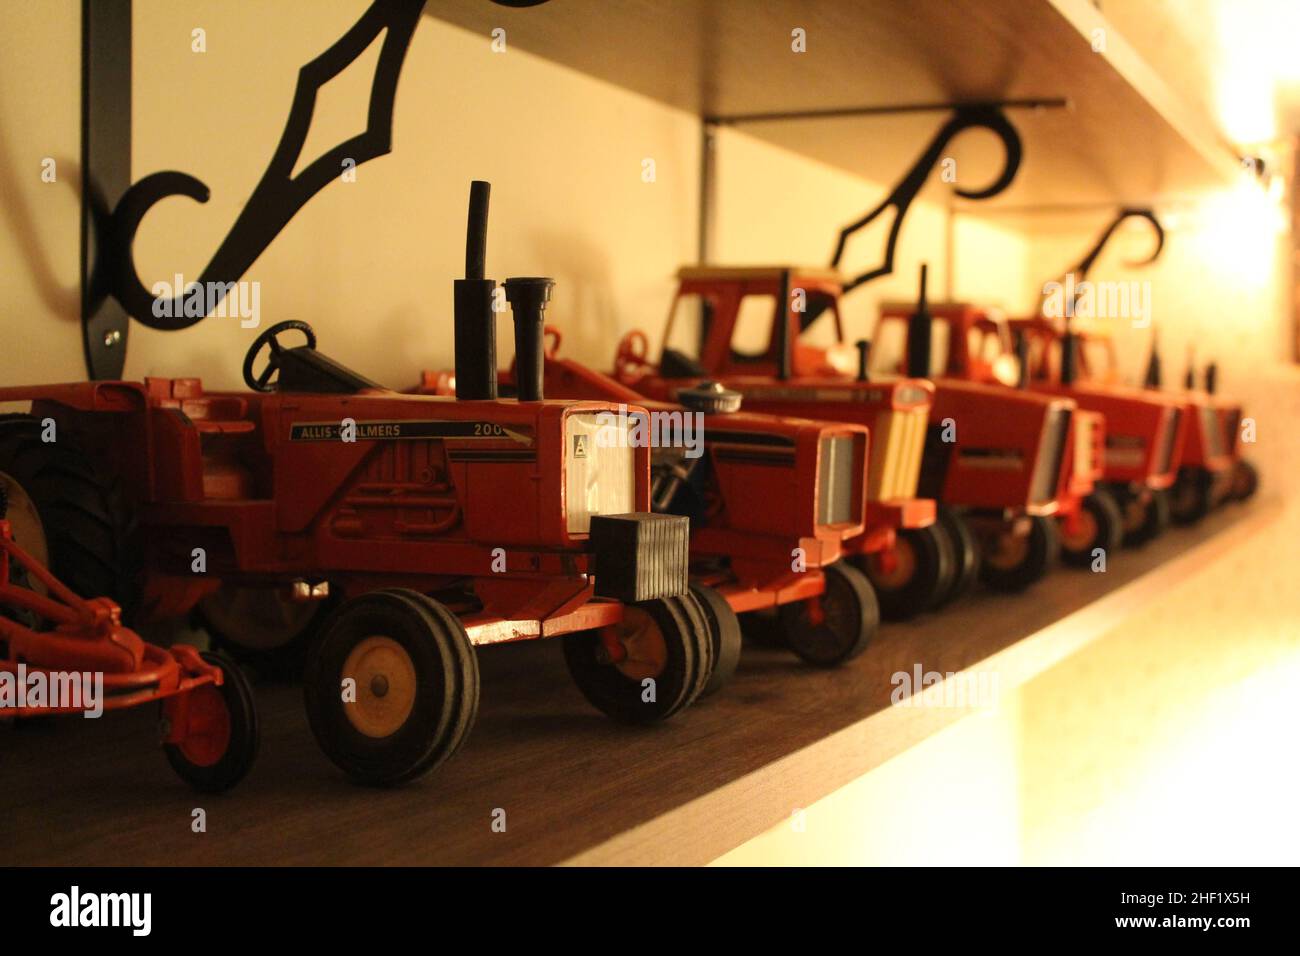 Display of Allis-Chalmers toy tractors Stock Photo